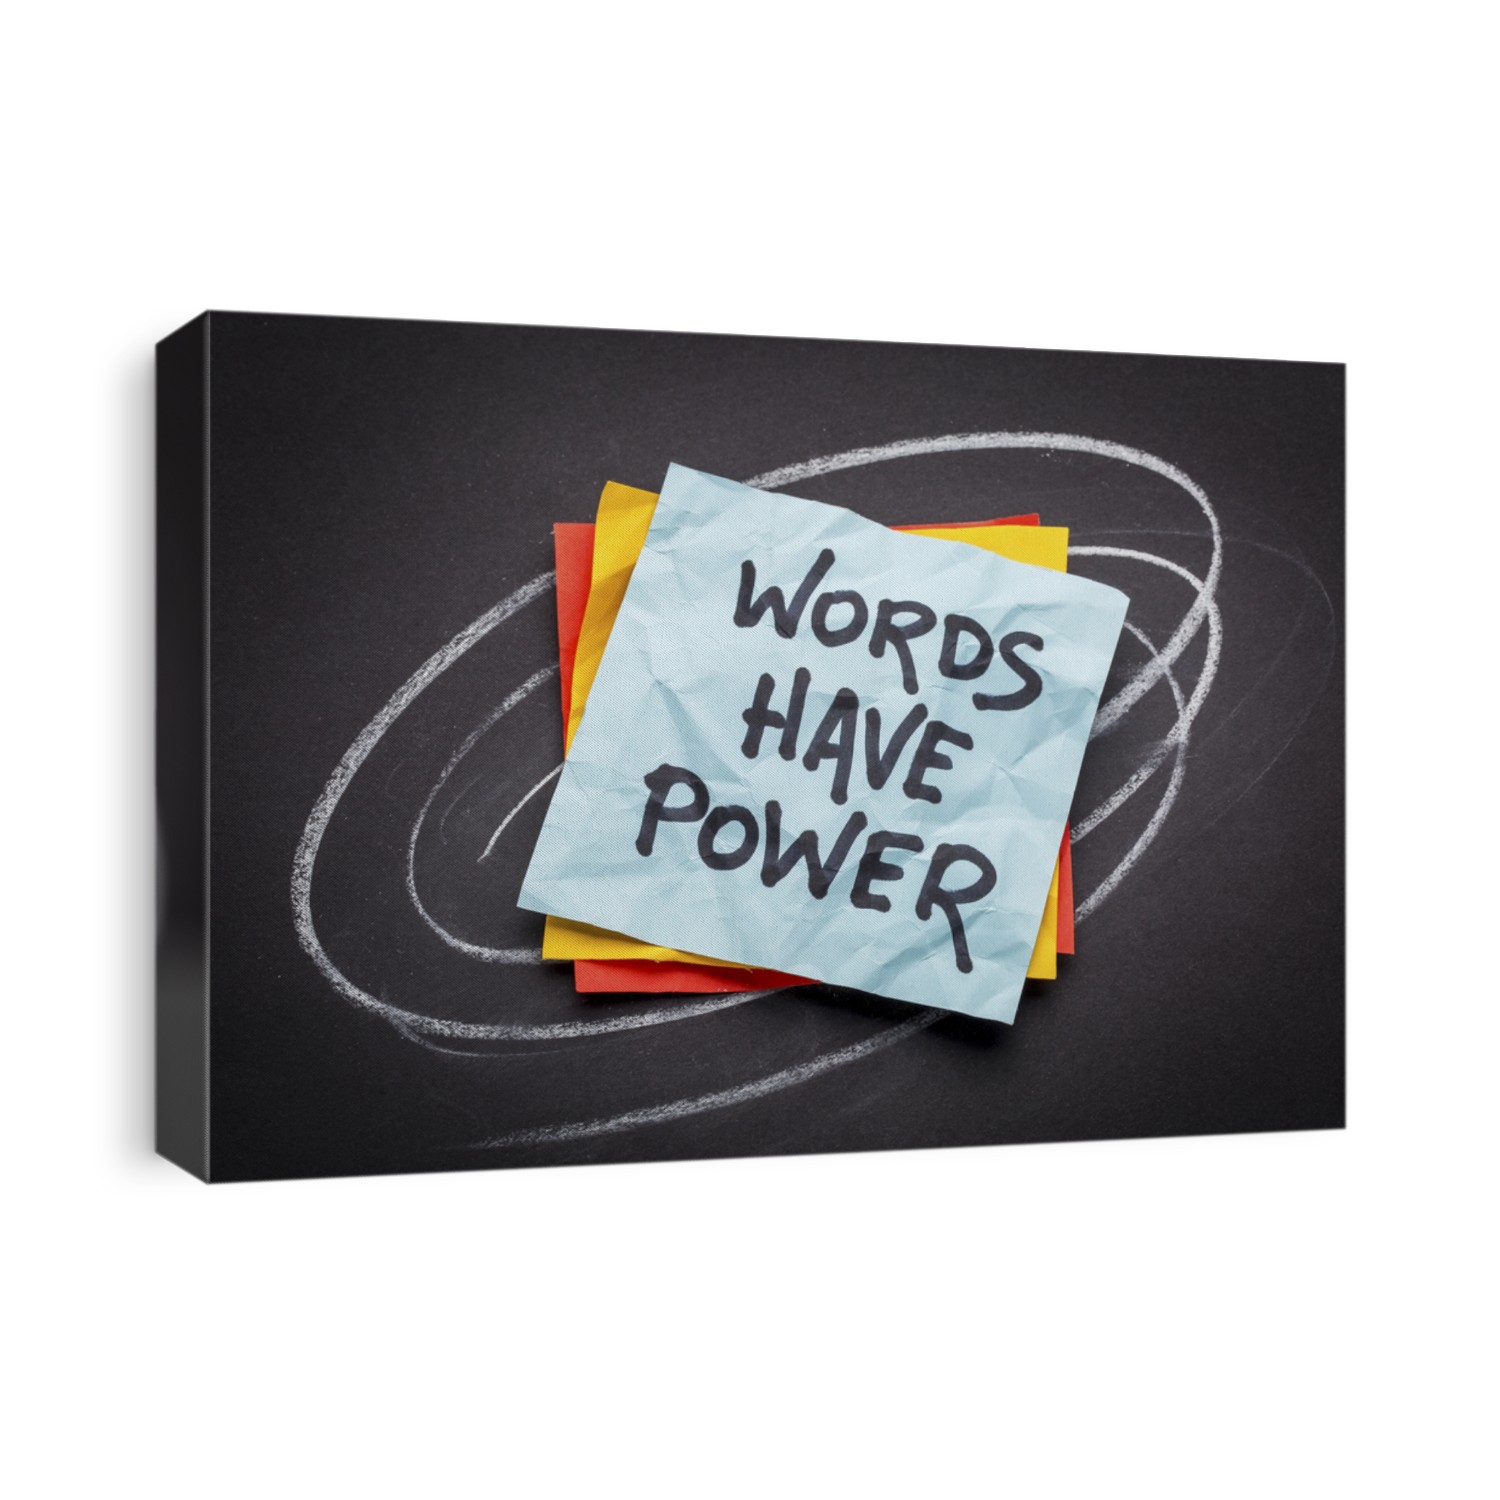 words have power - reminder on a sticky note against black paper